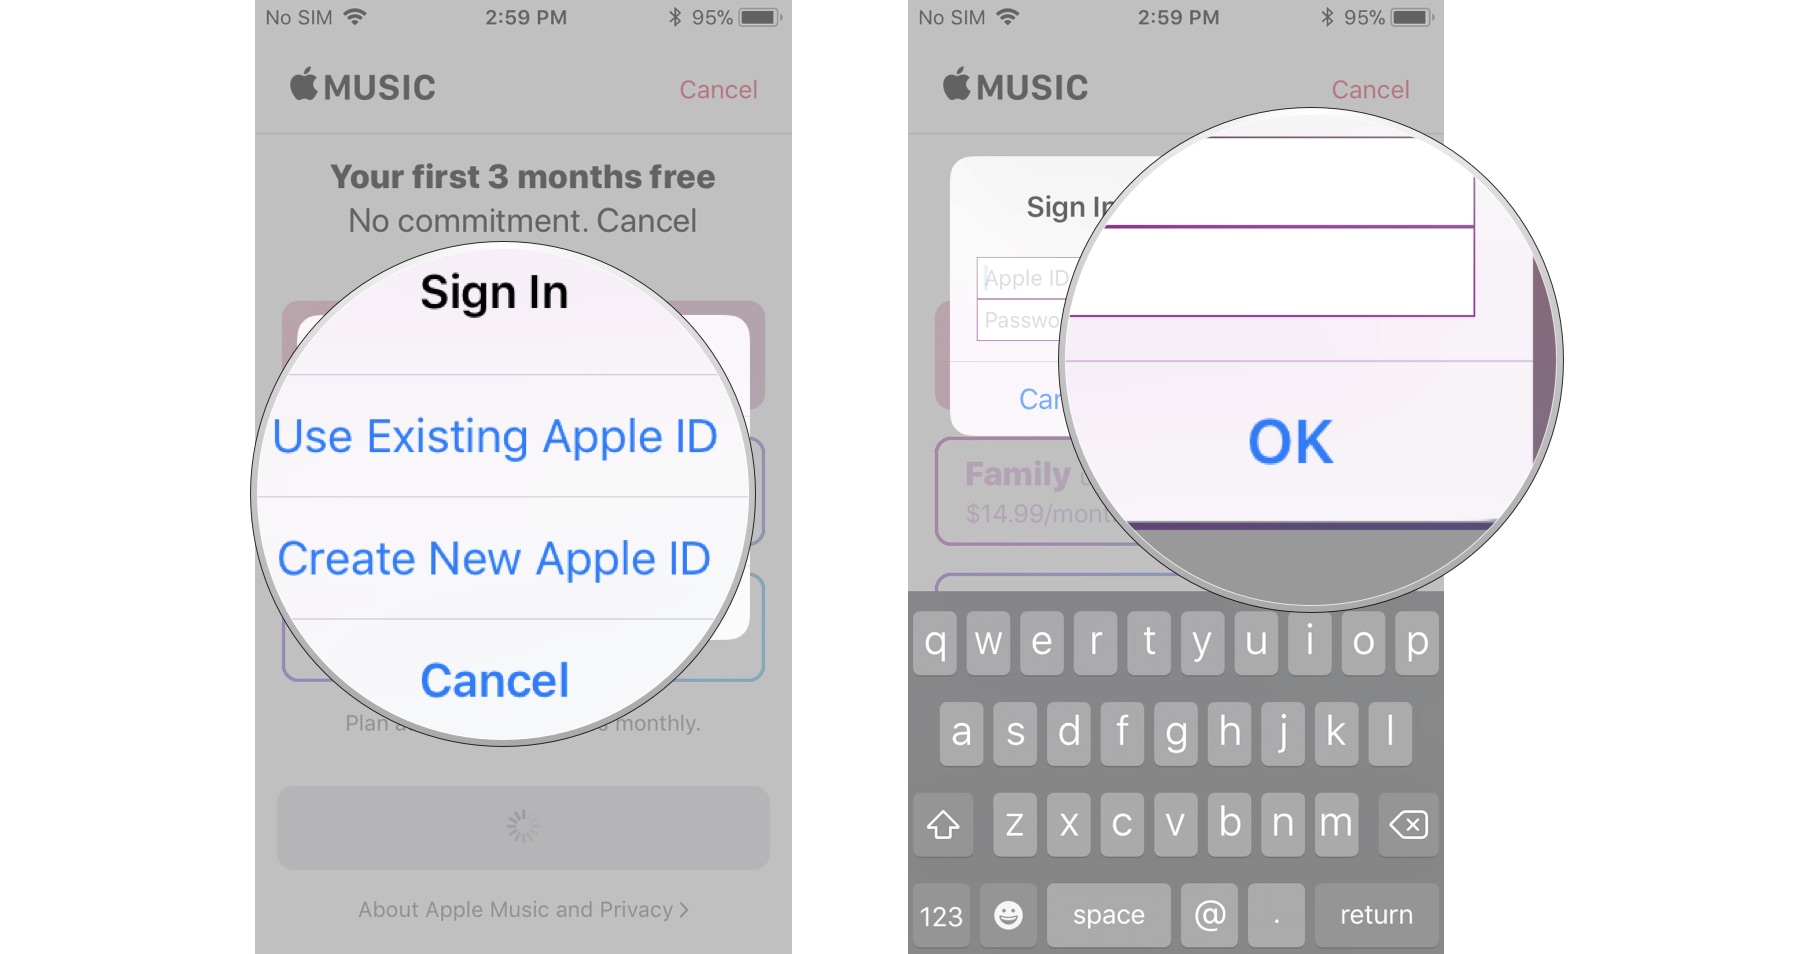 To sign up for Apple Music on your iPhone or iPad, sign in with your Apple ID and password, then Confirm.